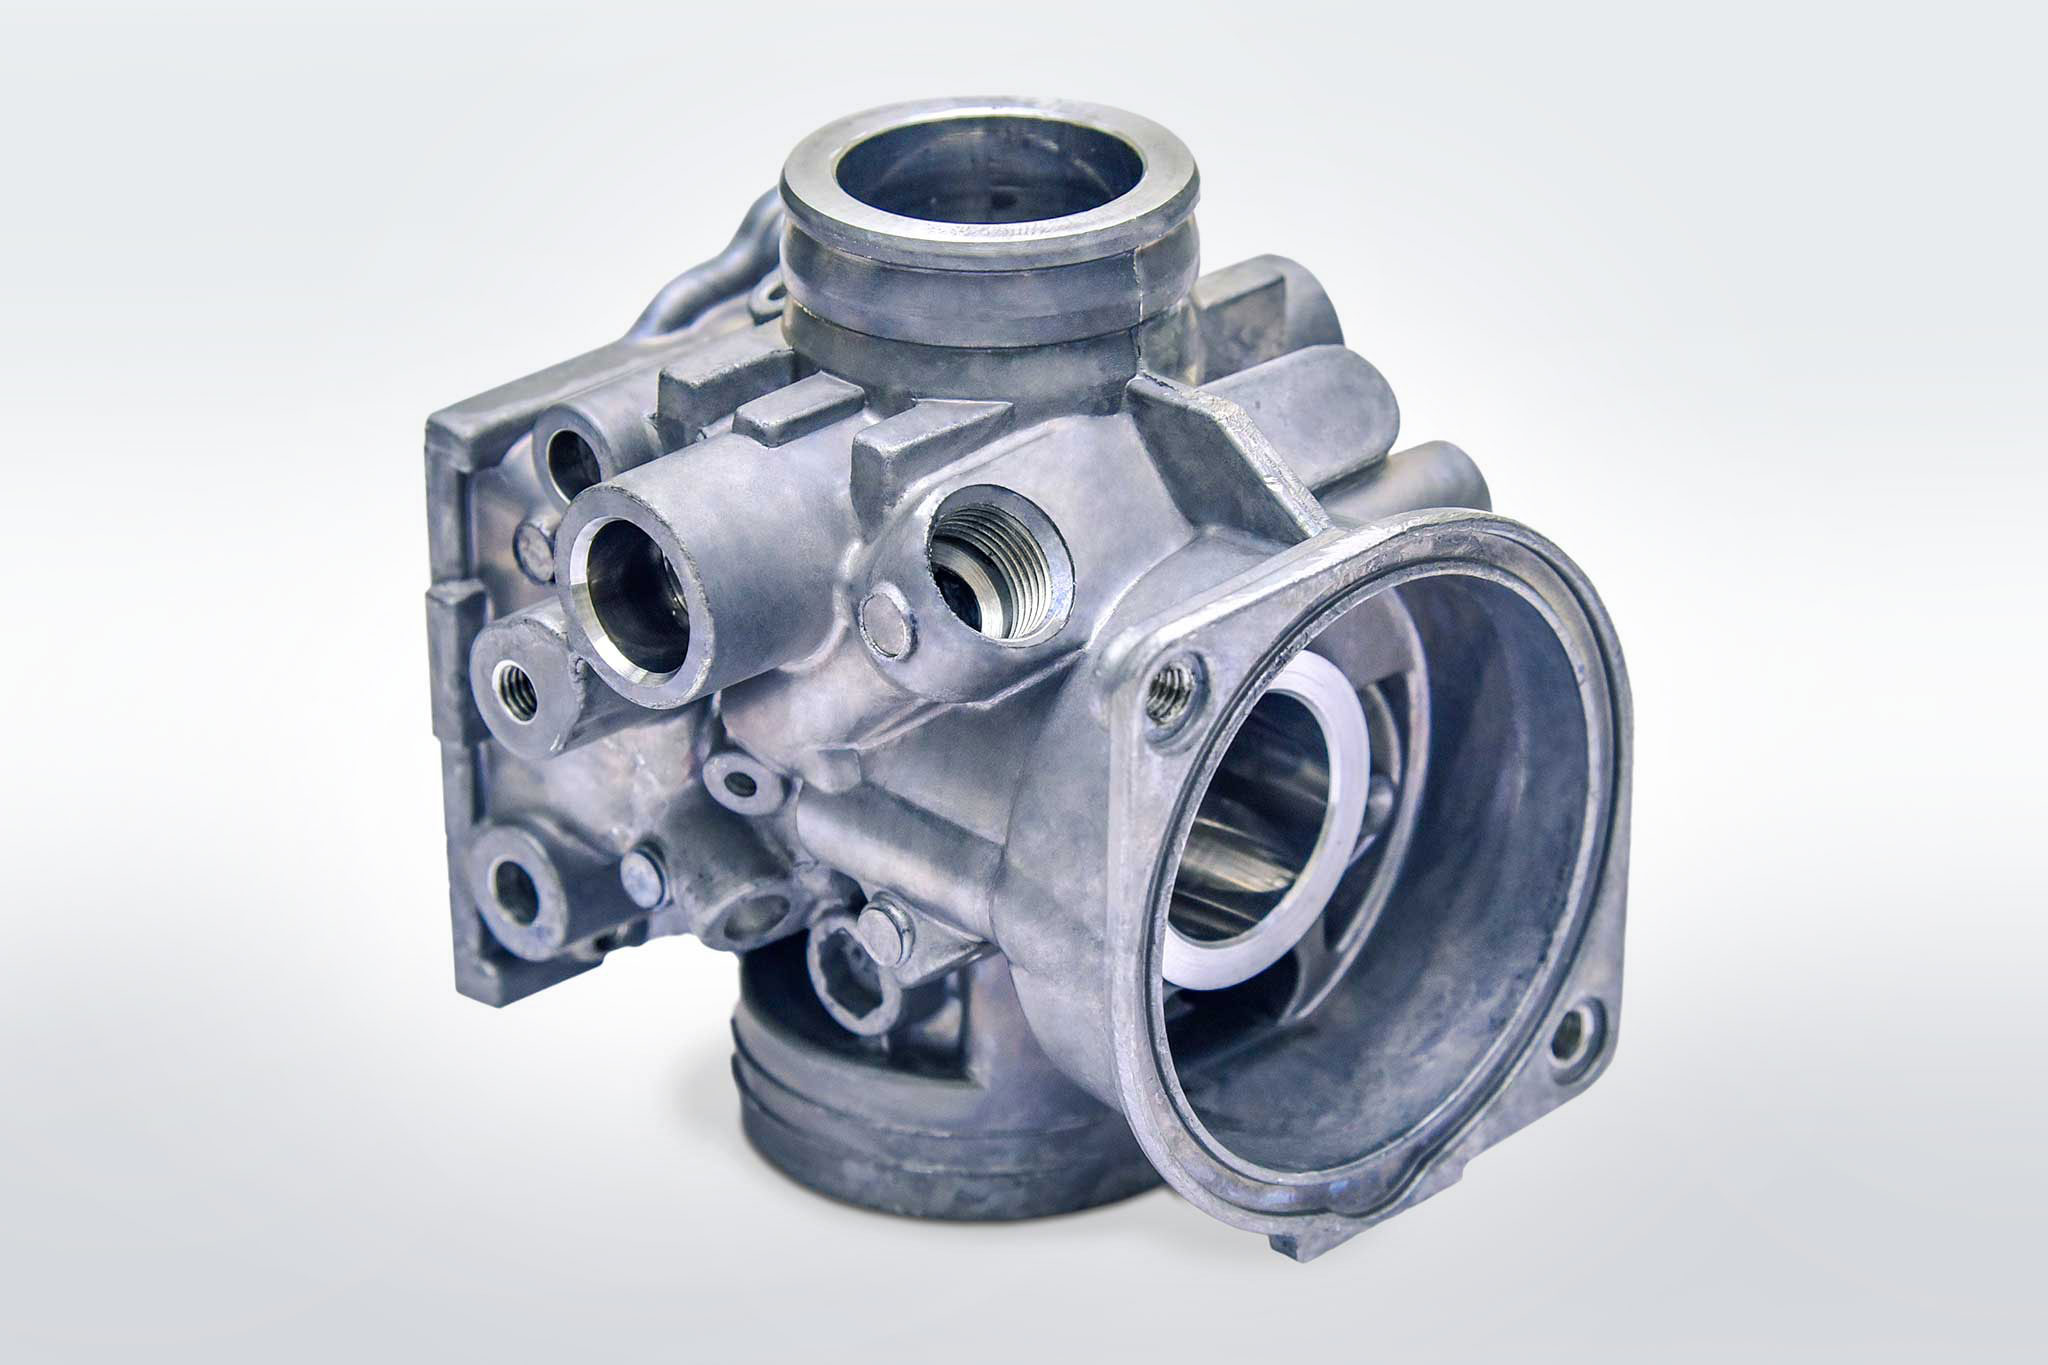 A carburettor housing is shown in the image.